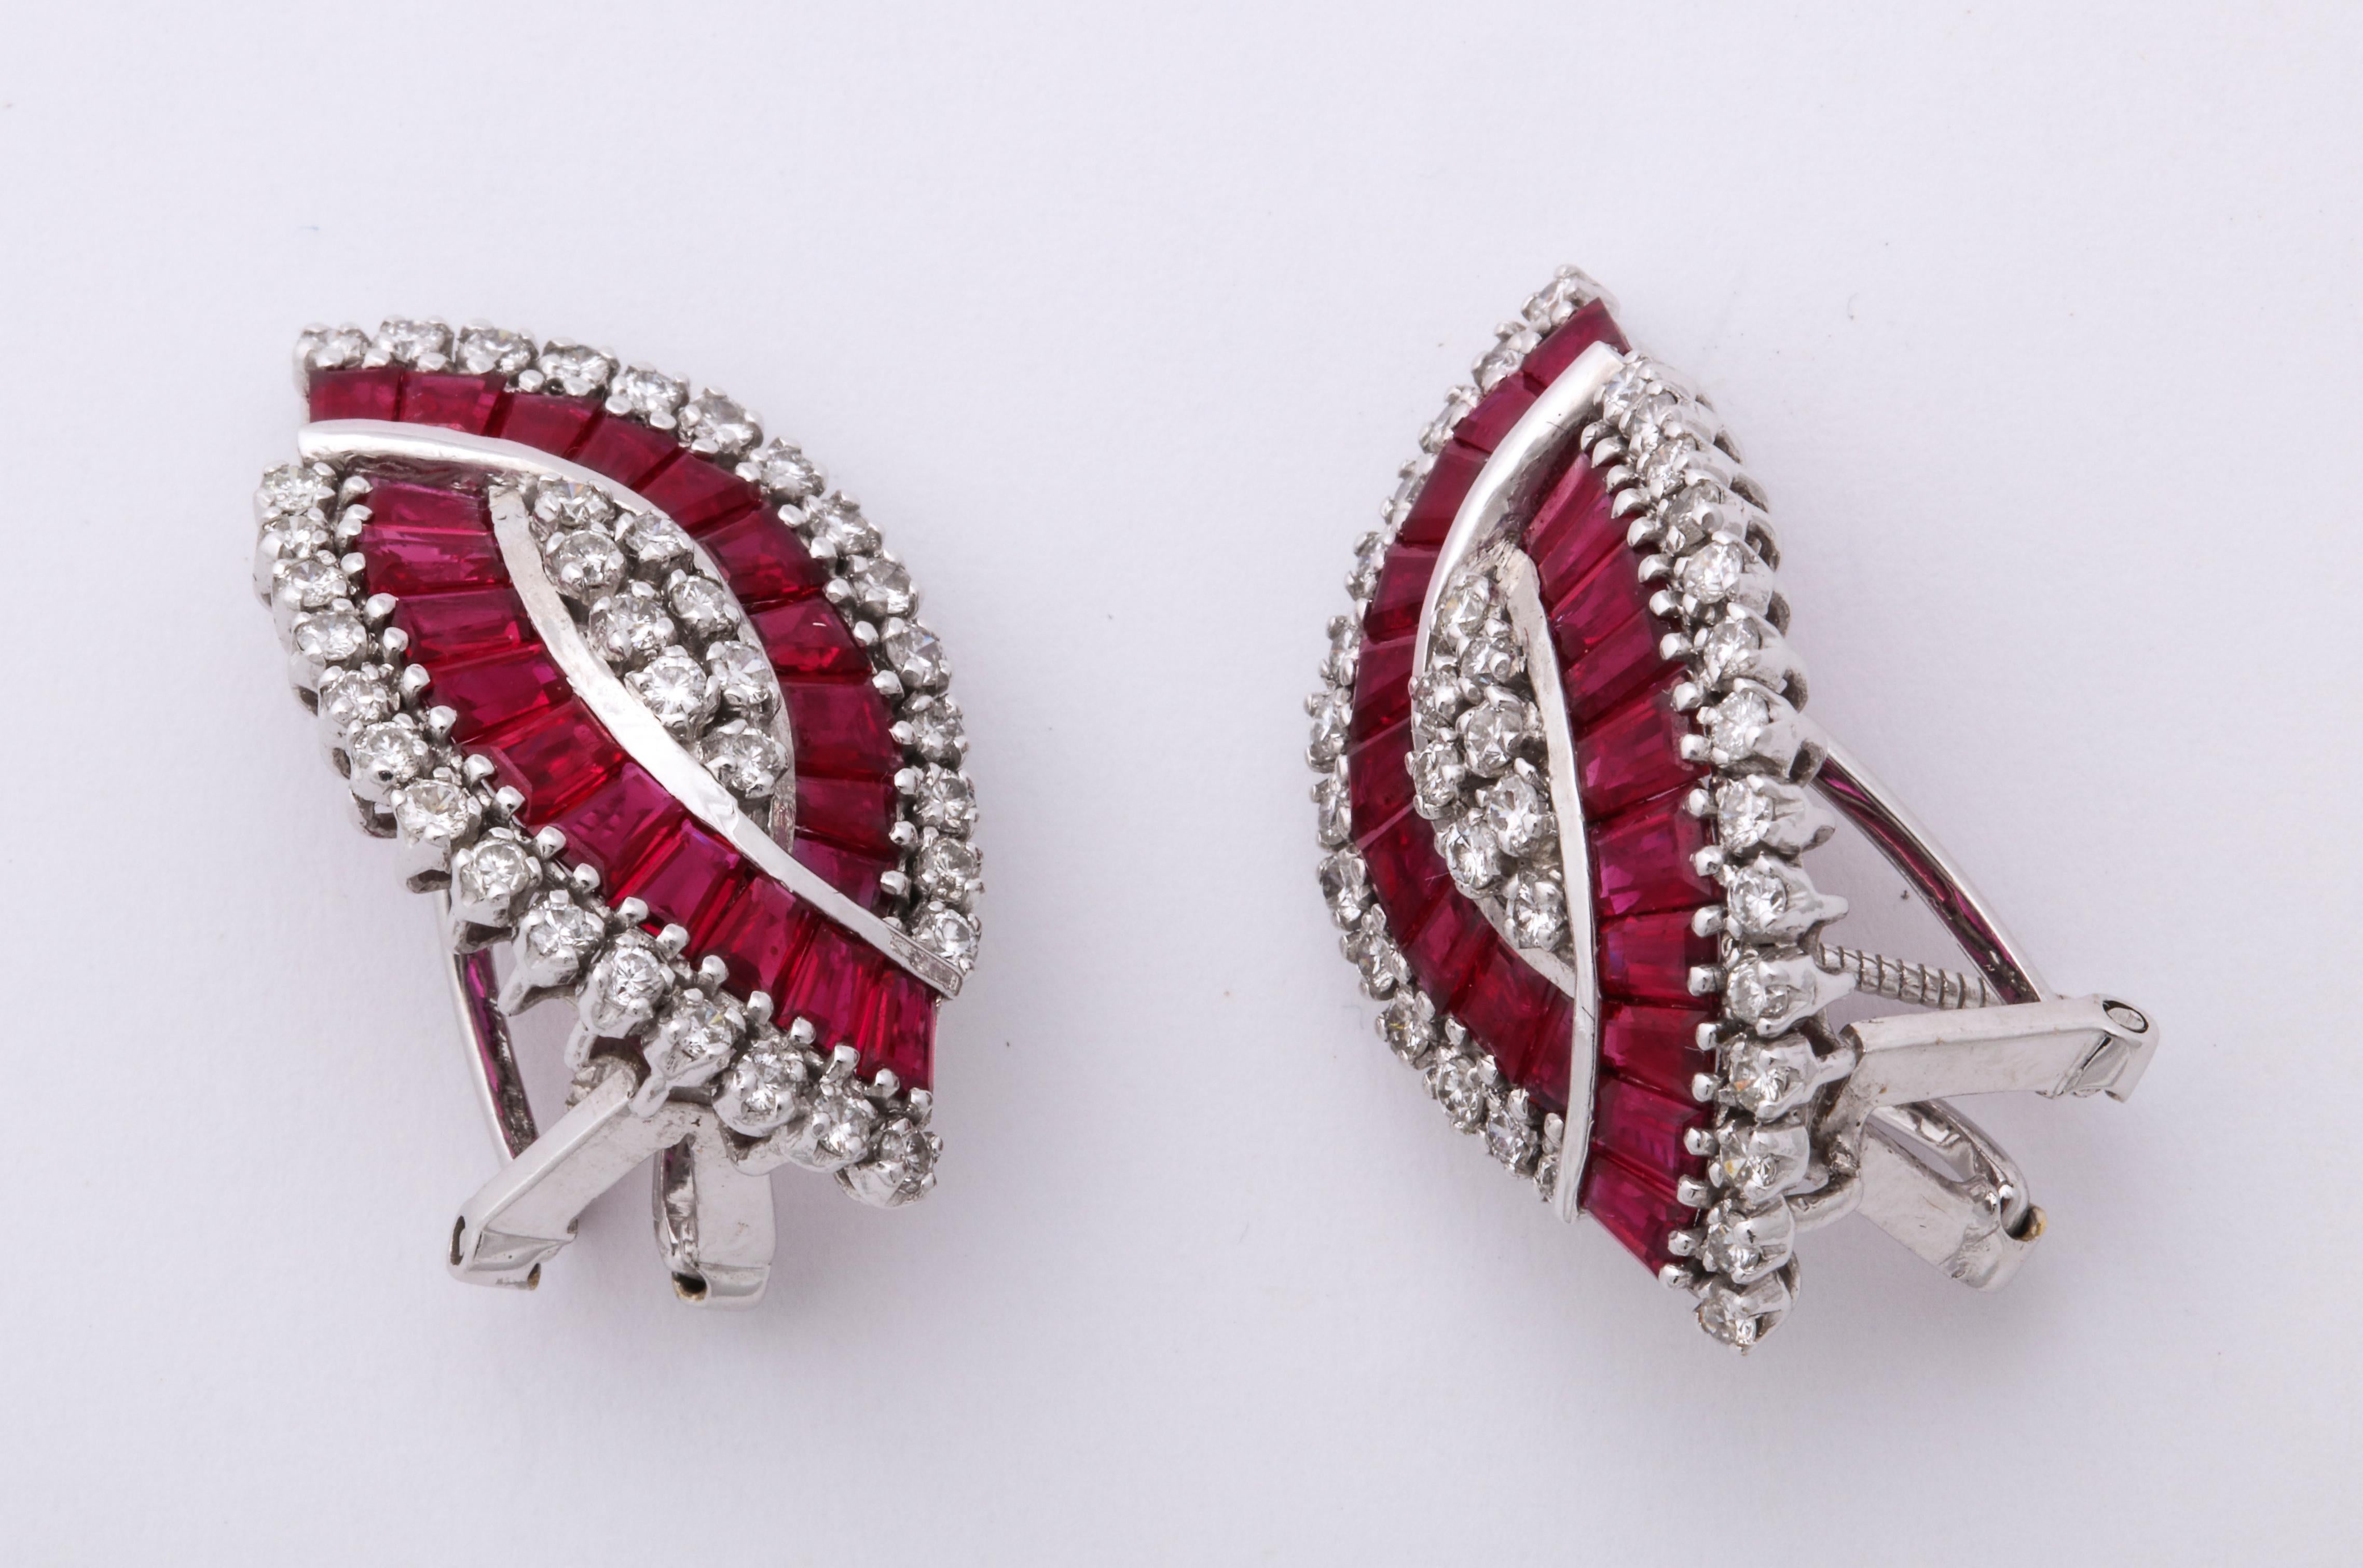  Vintage Natural Ruby and Diamond Earrings White  Gold im Zustand „Gut“ im Angebot in New York, NY